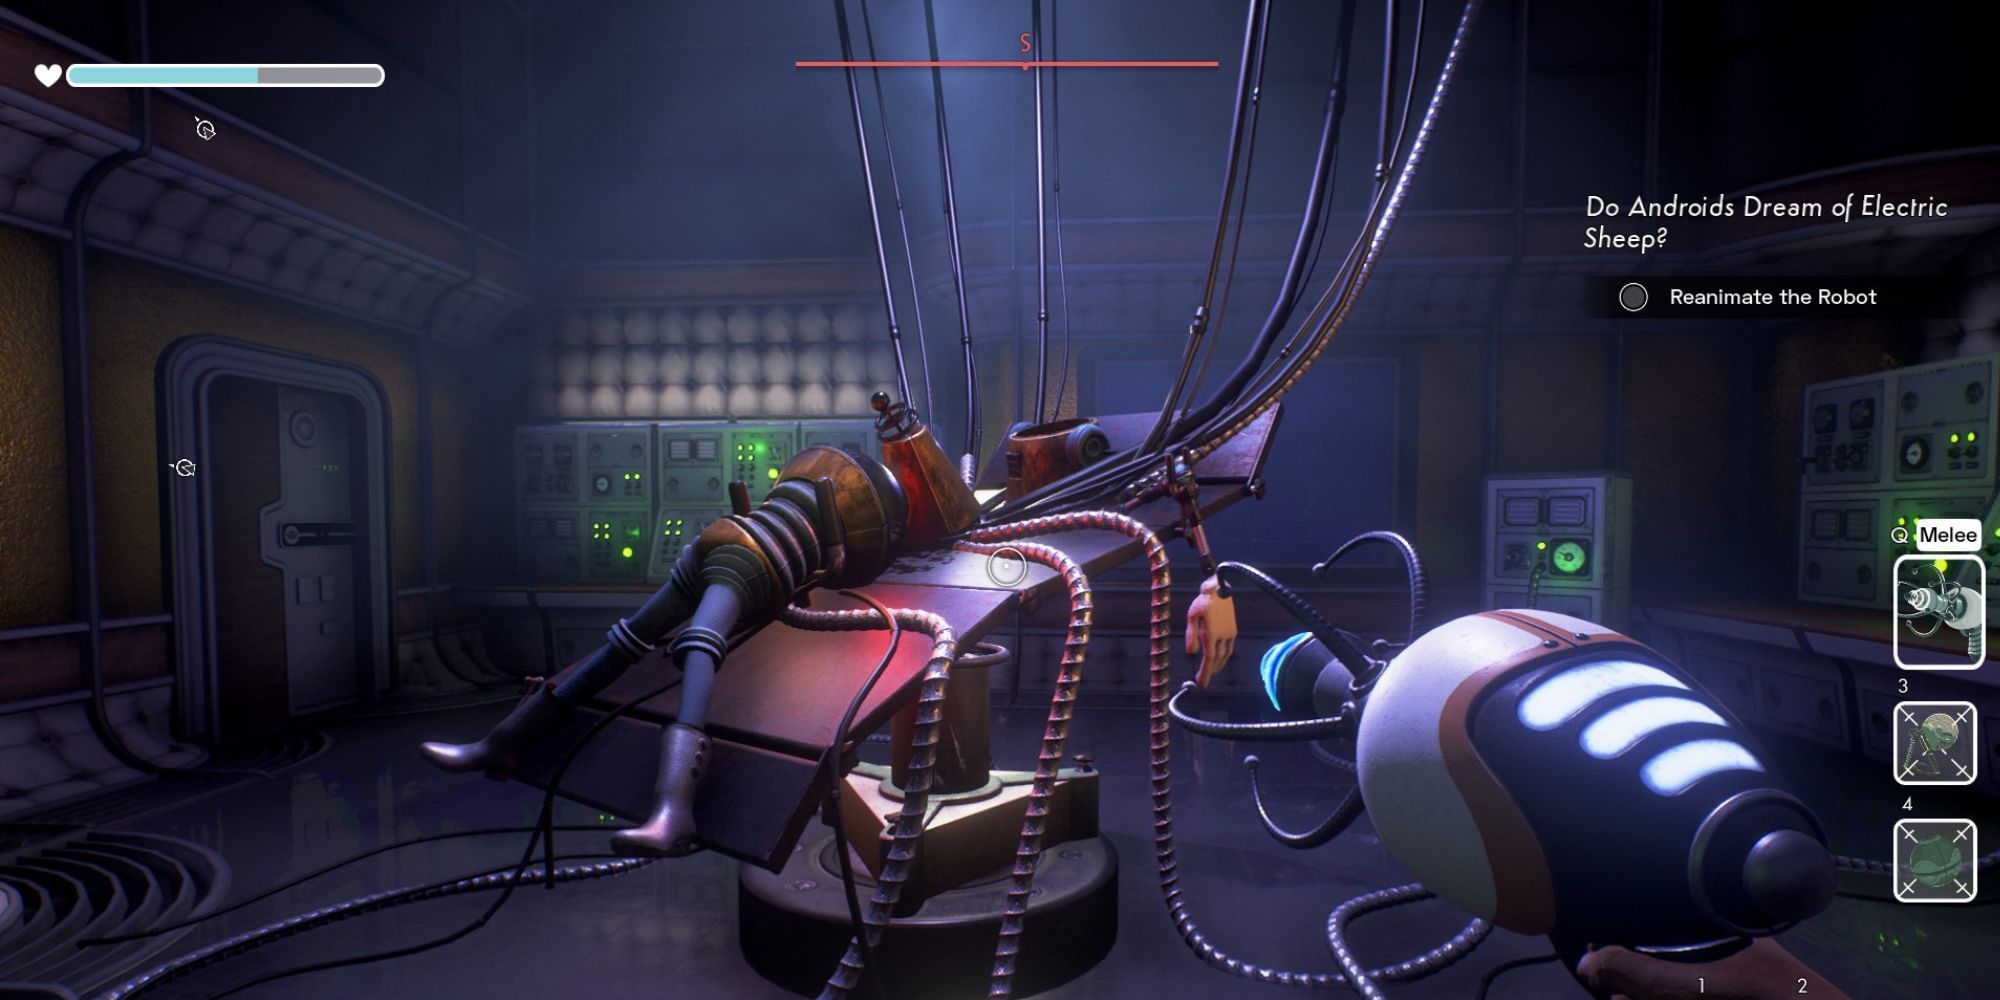 During a DLC mission, a dismantled robot lies on an operating table, with Roger equipping a ray gun